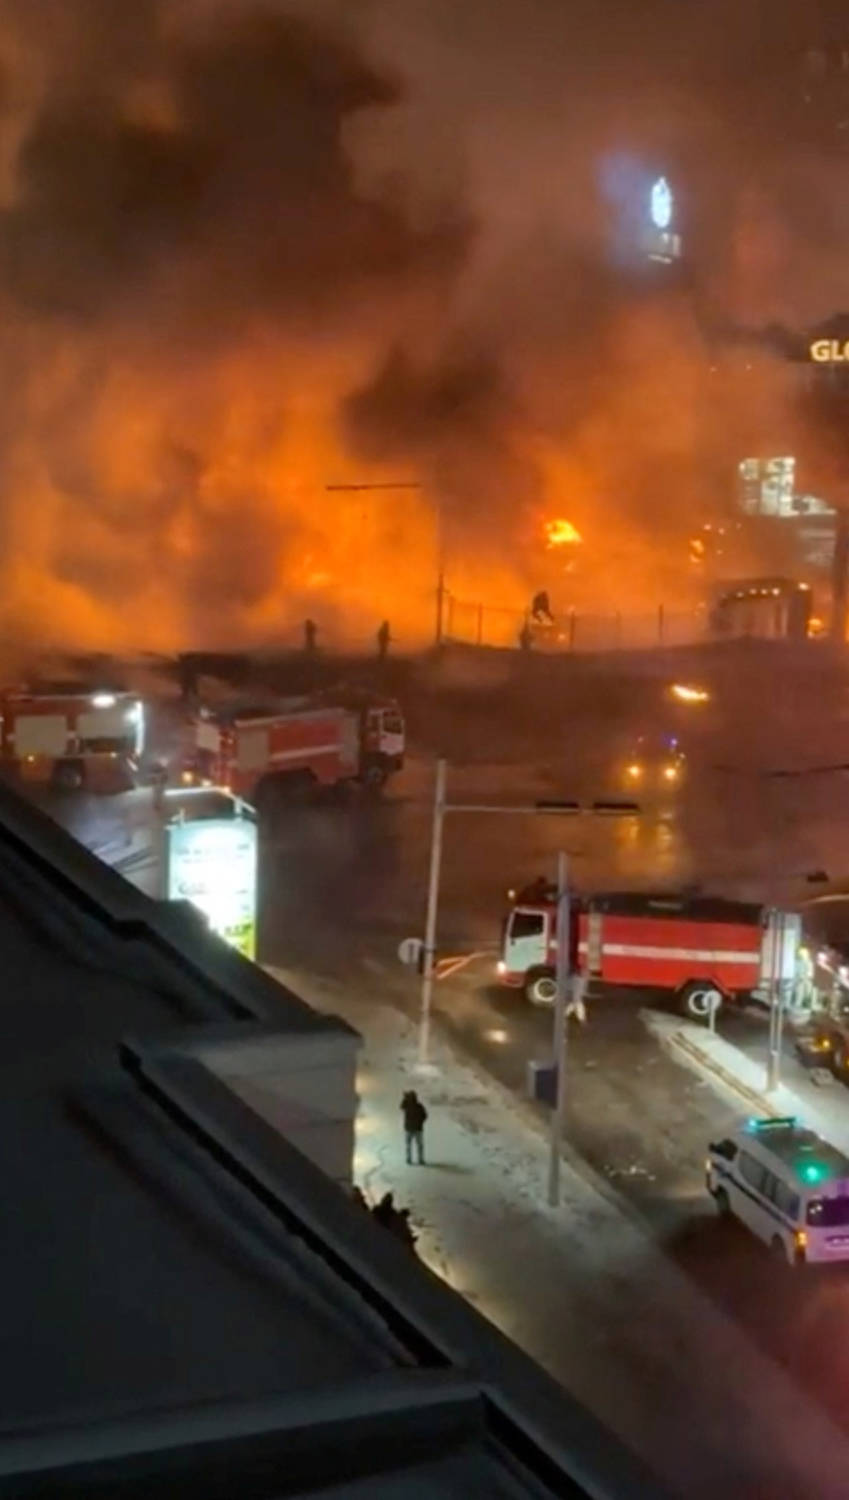 Fire Trucks Stand Near The Site Of Fire Following An Explosion In Ulaanbaatar